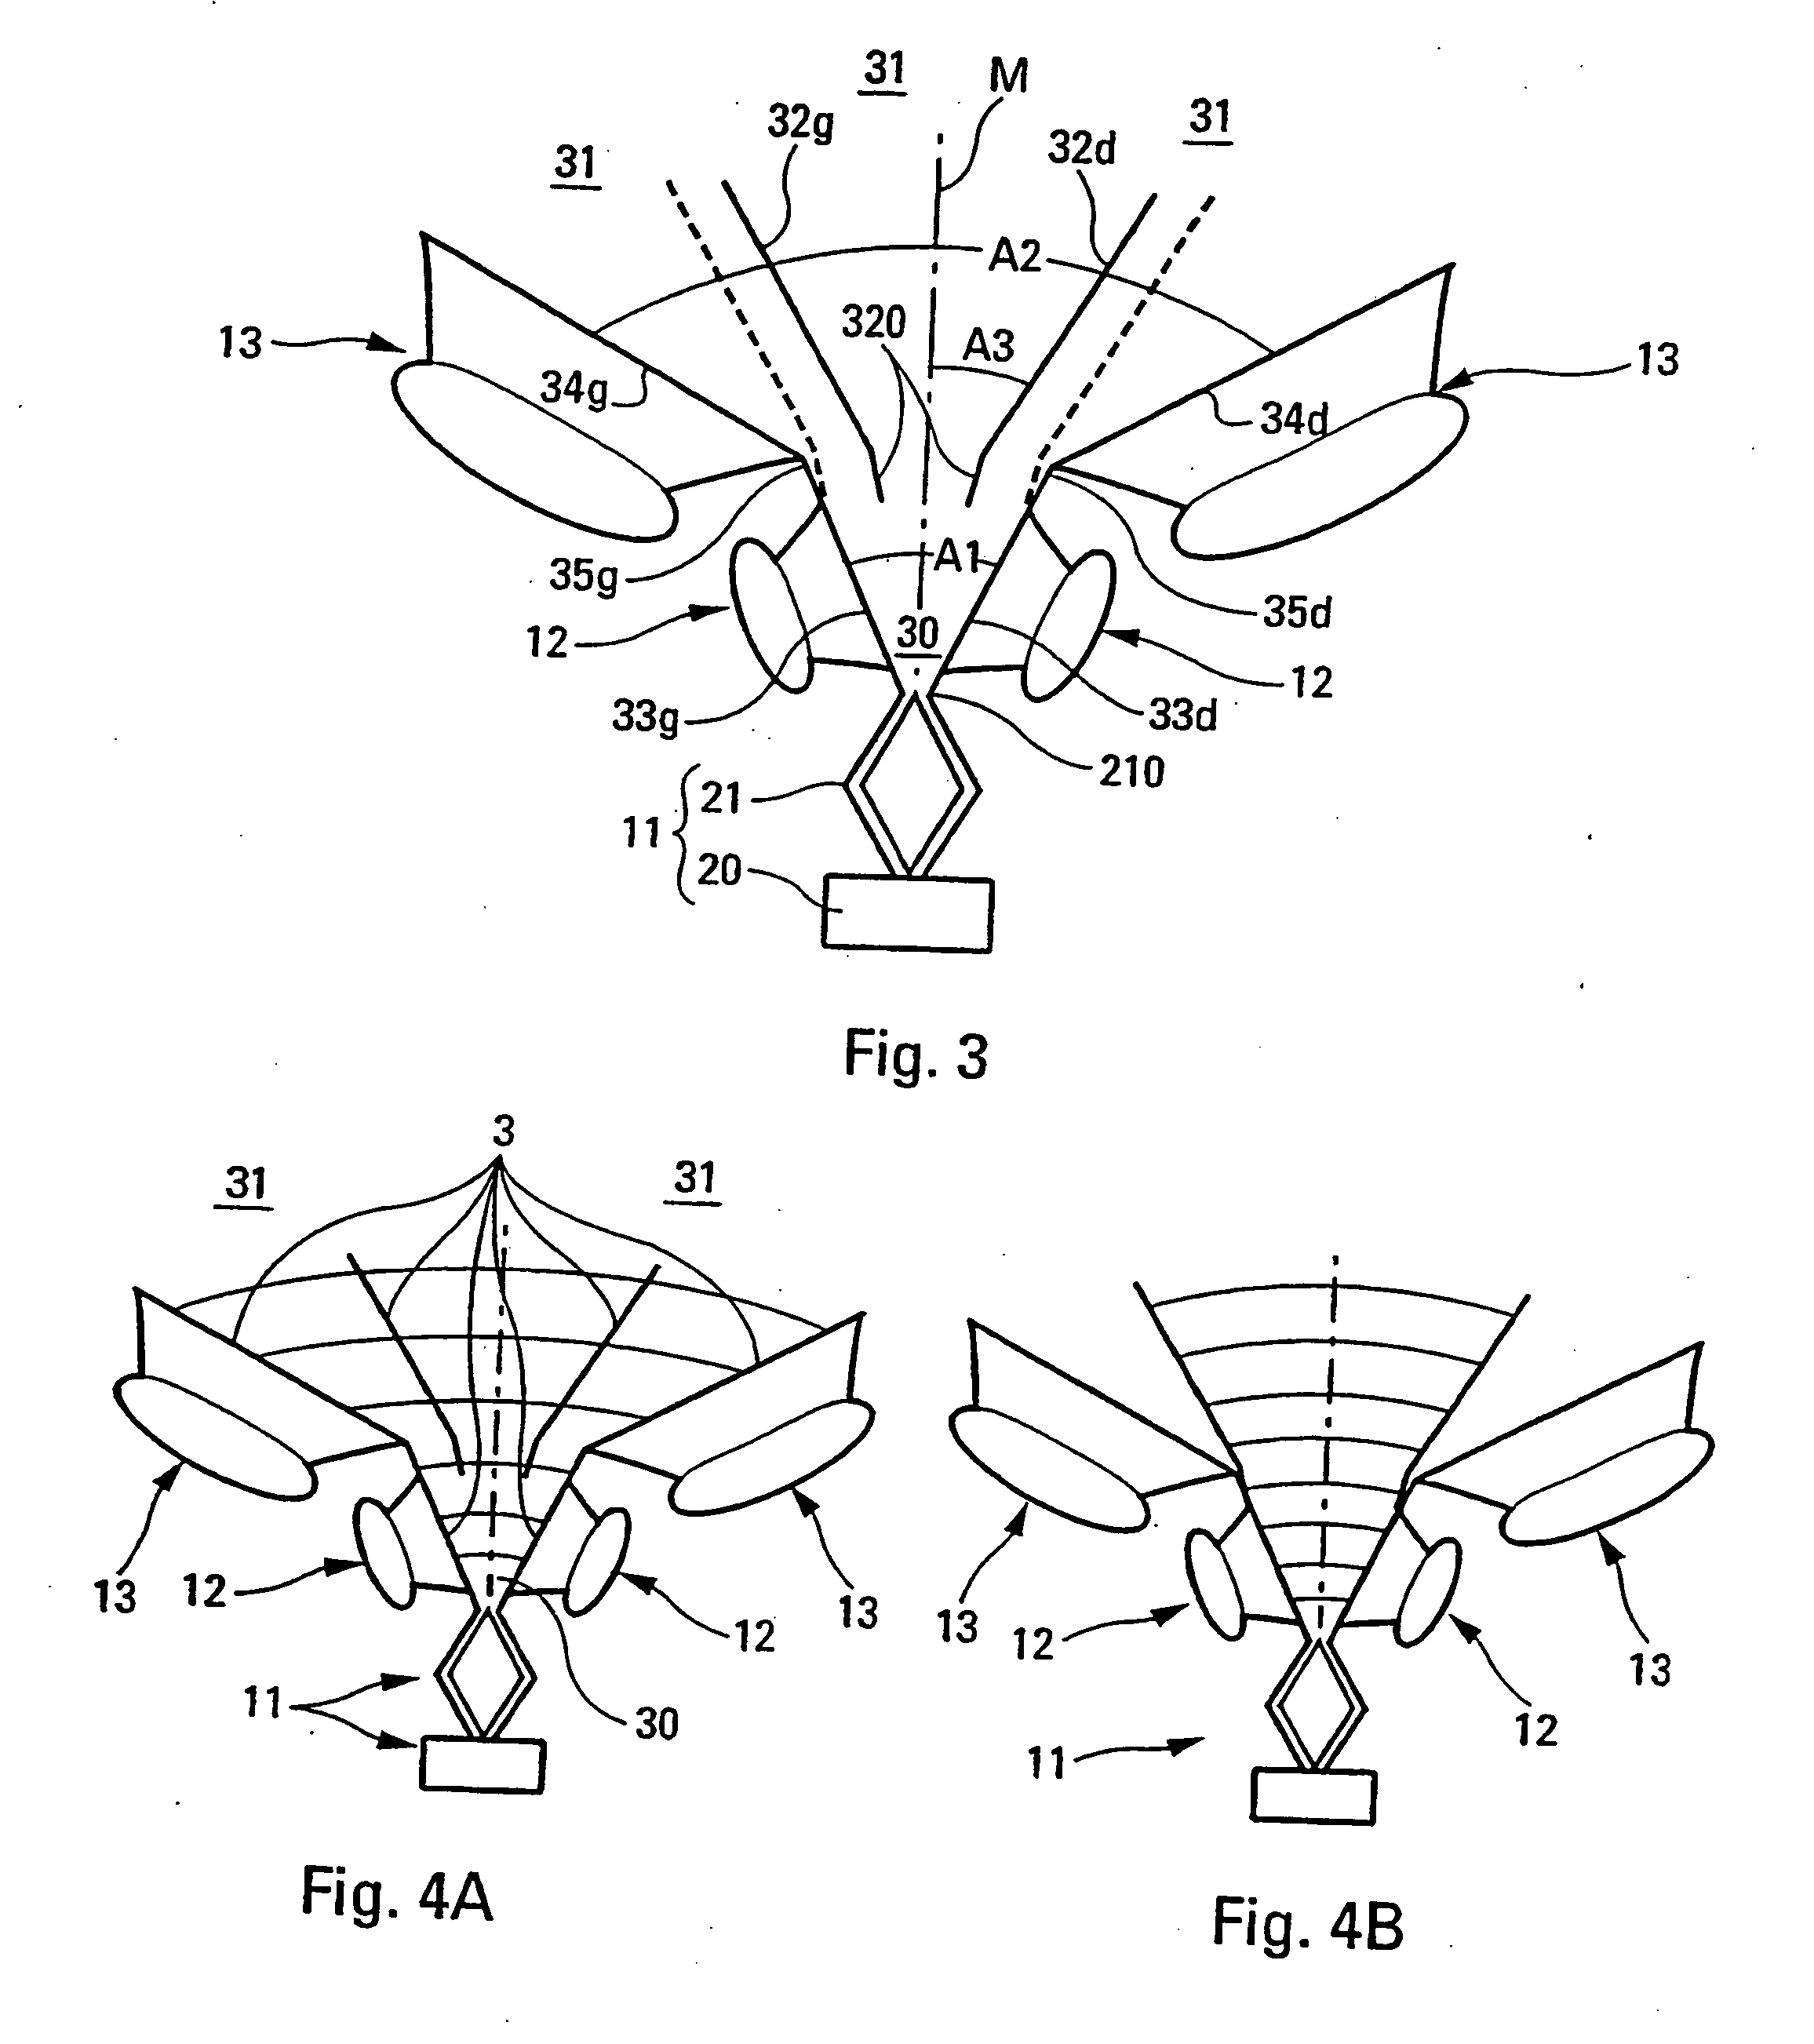 Public address system with adjustable directivity